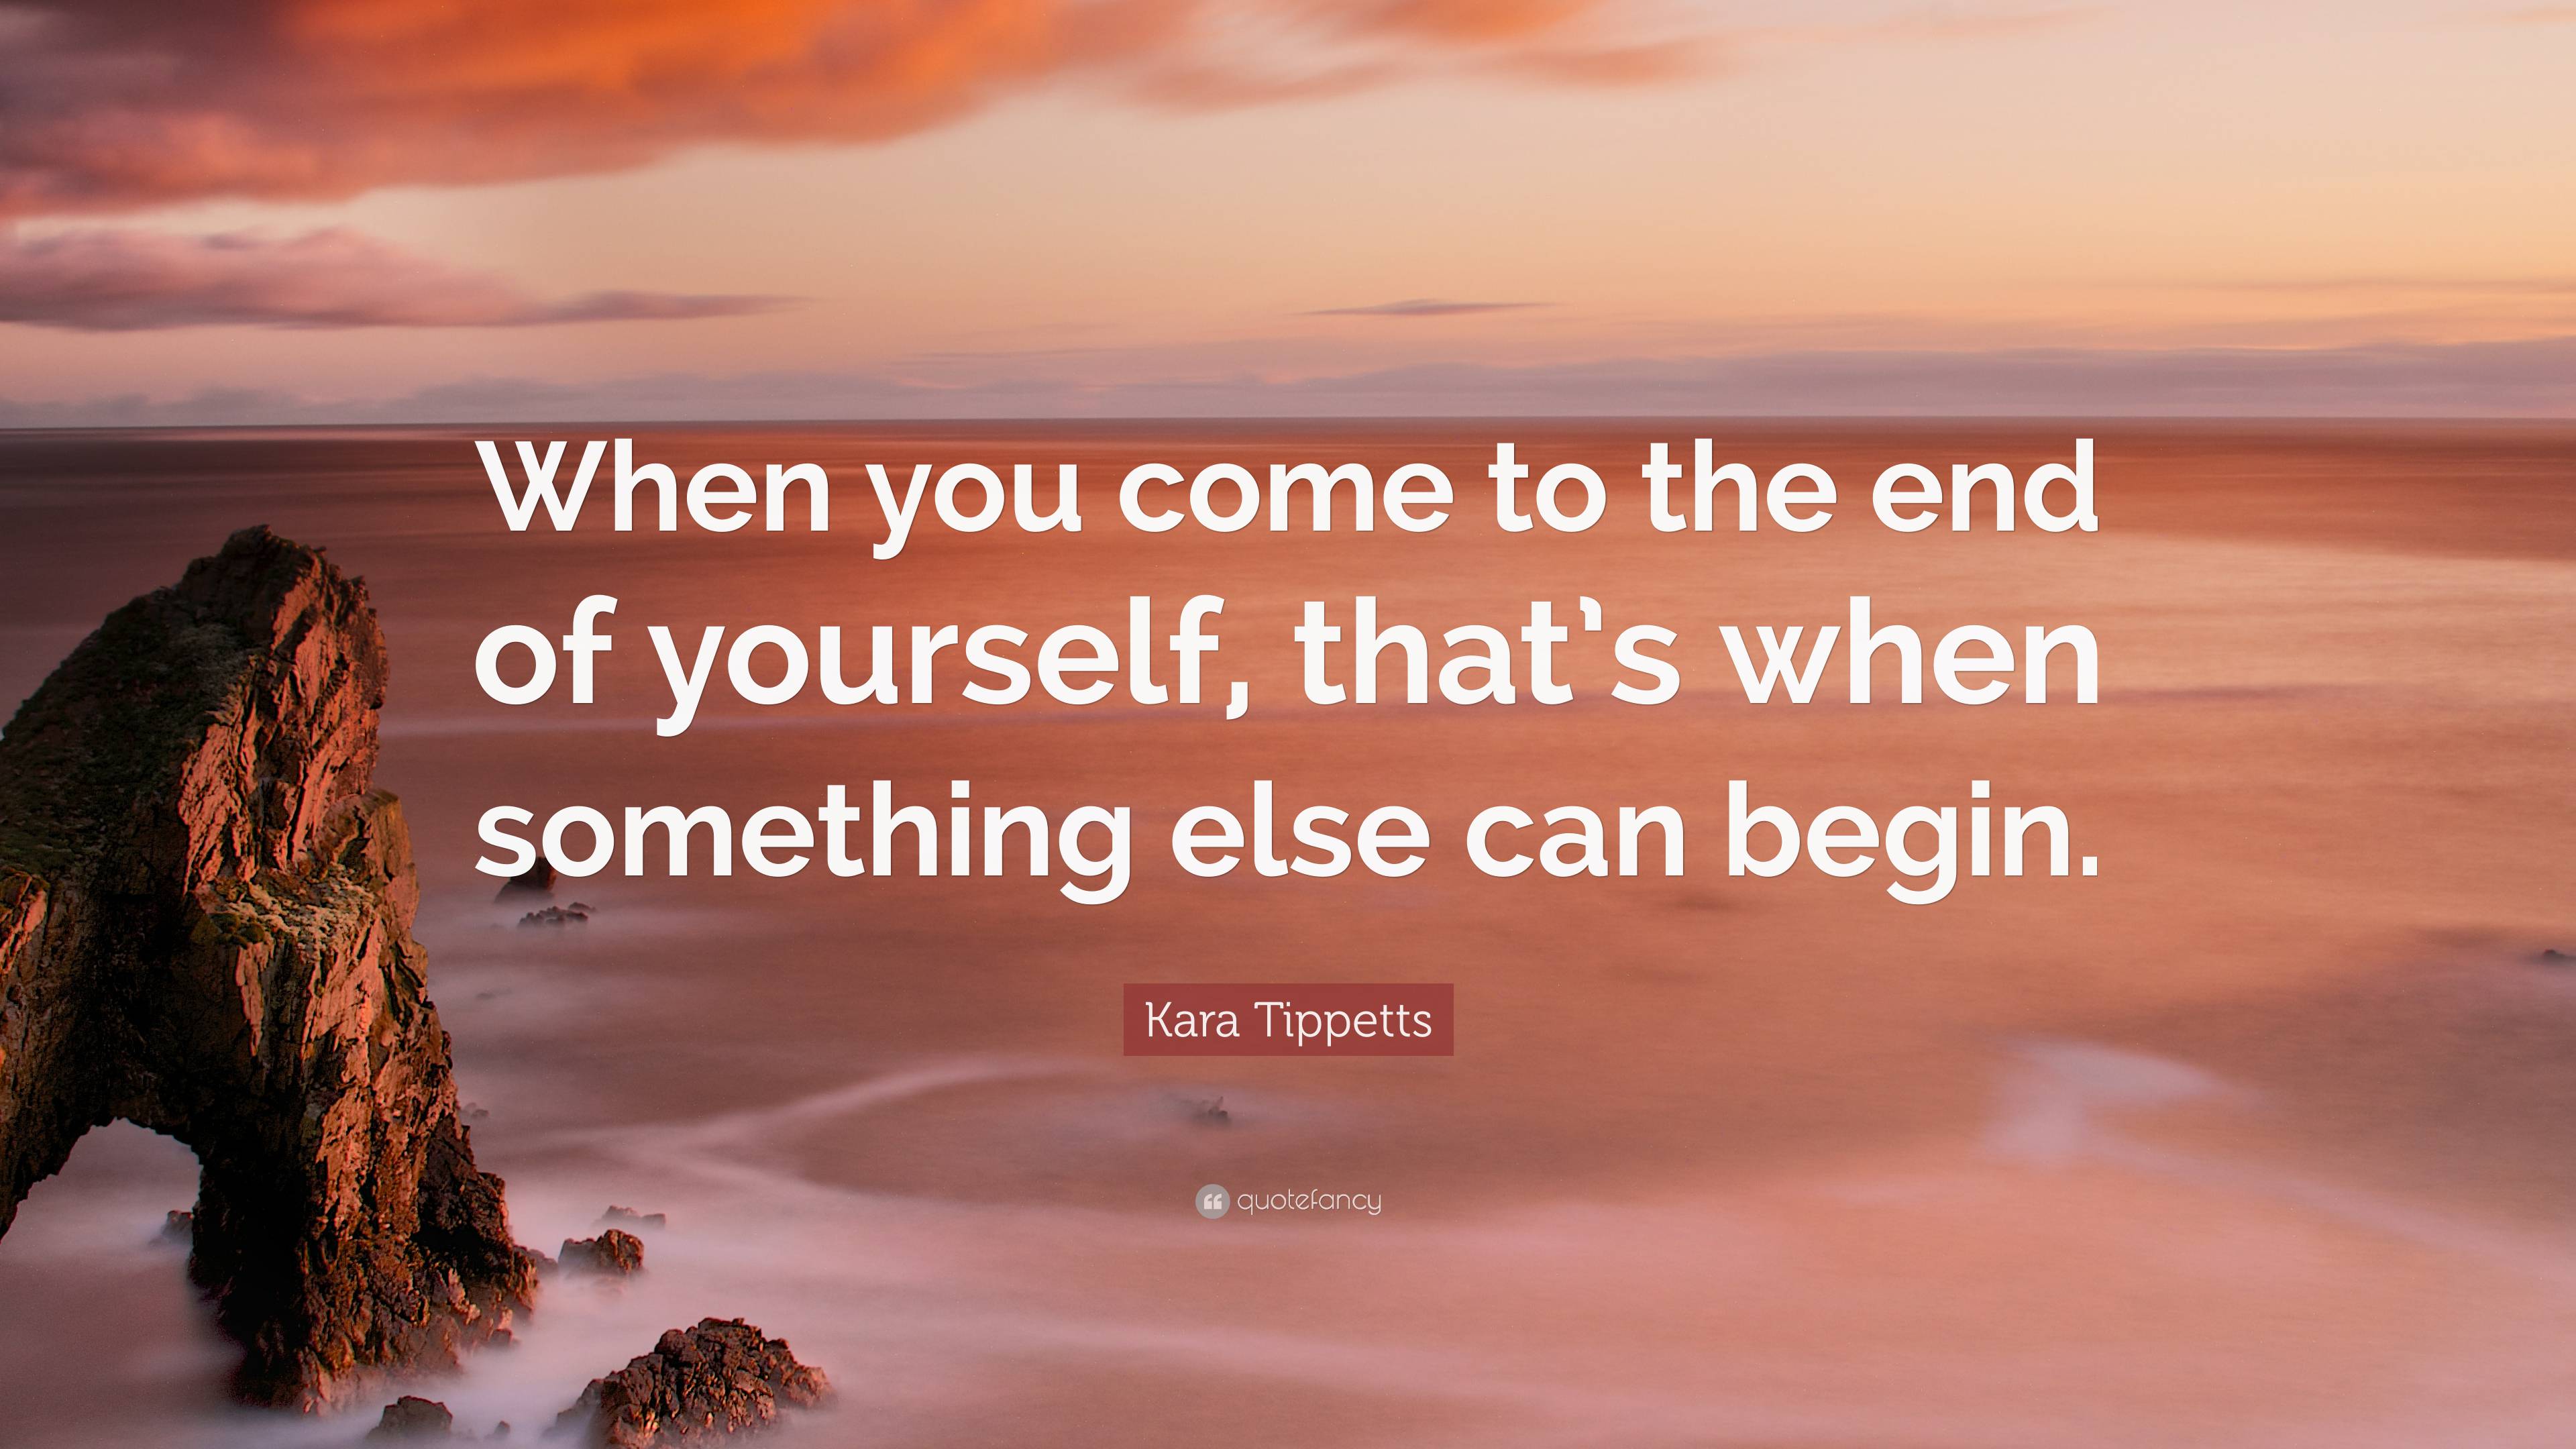 Kara Tippetts Quote: “When you come to the end of yourself, that’s when ...